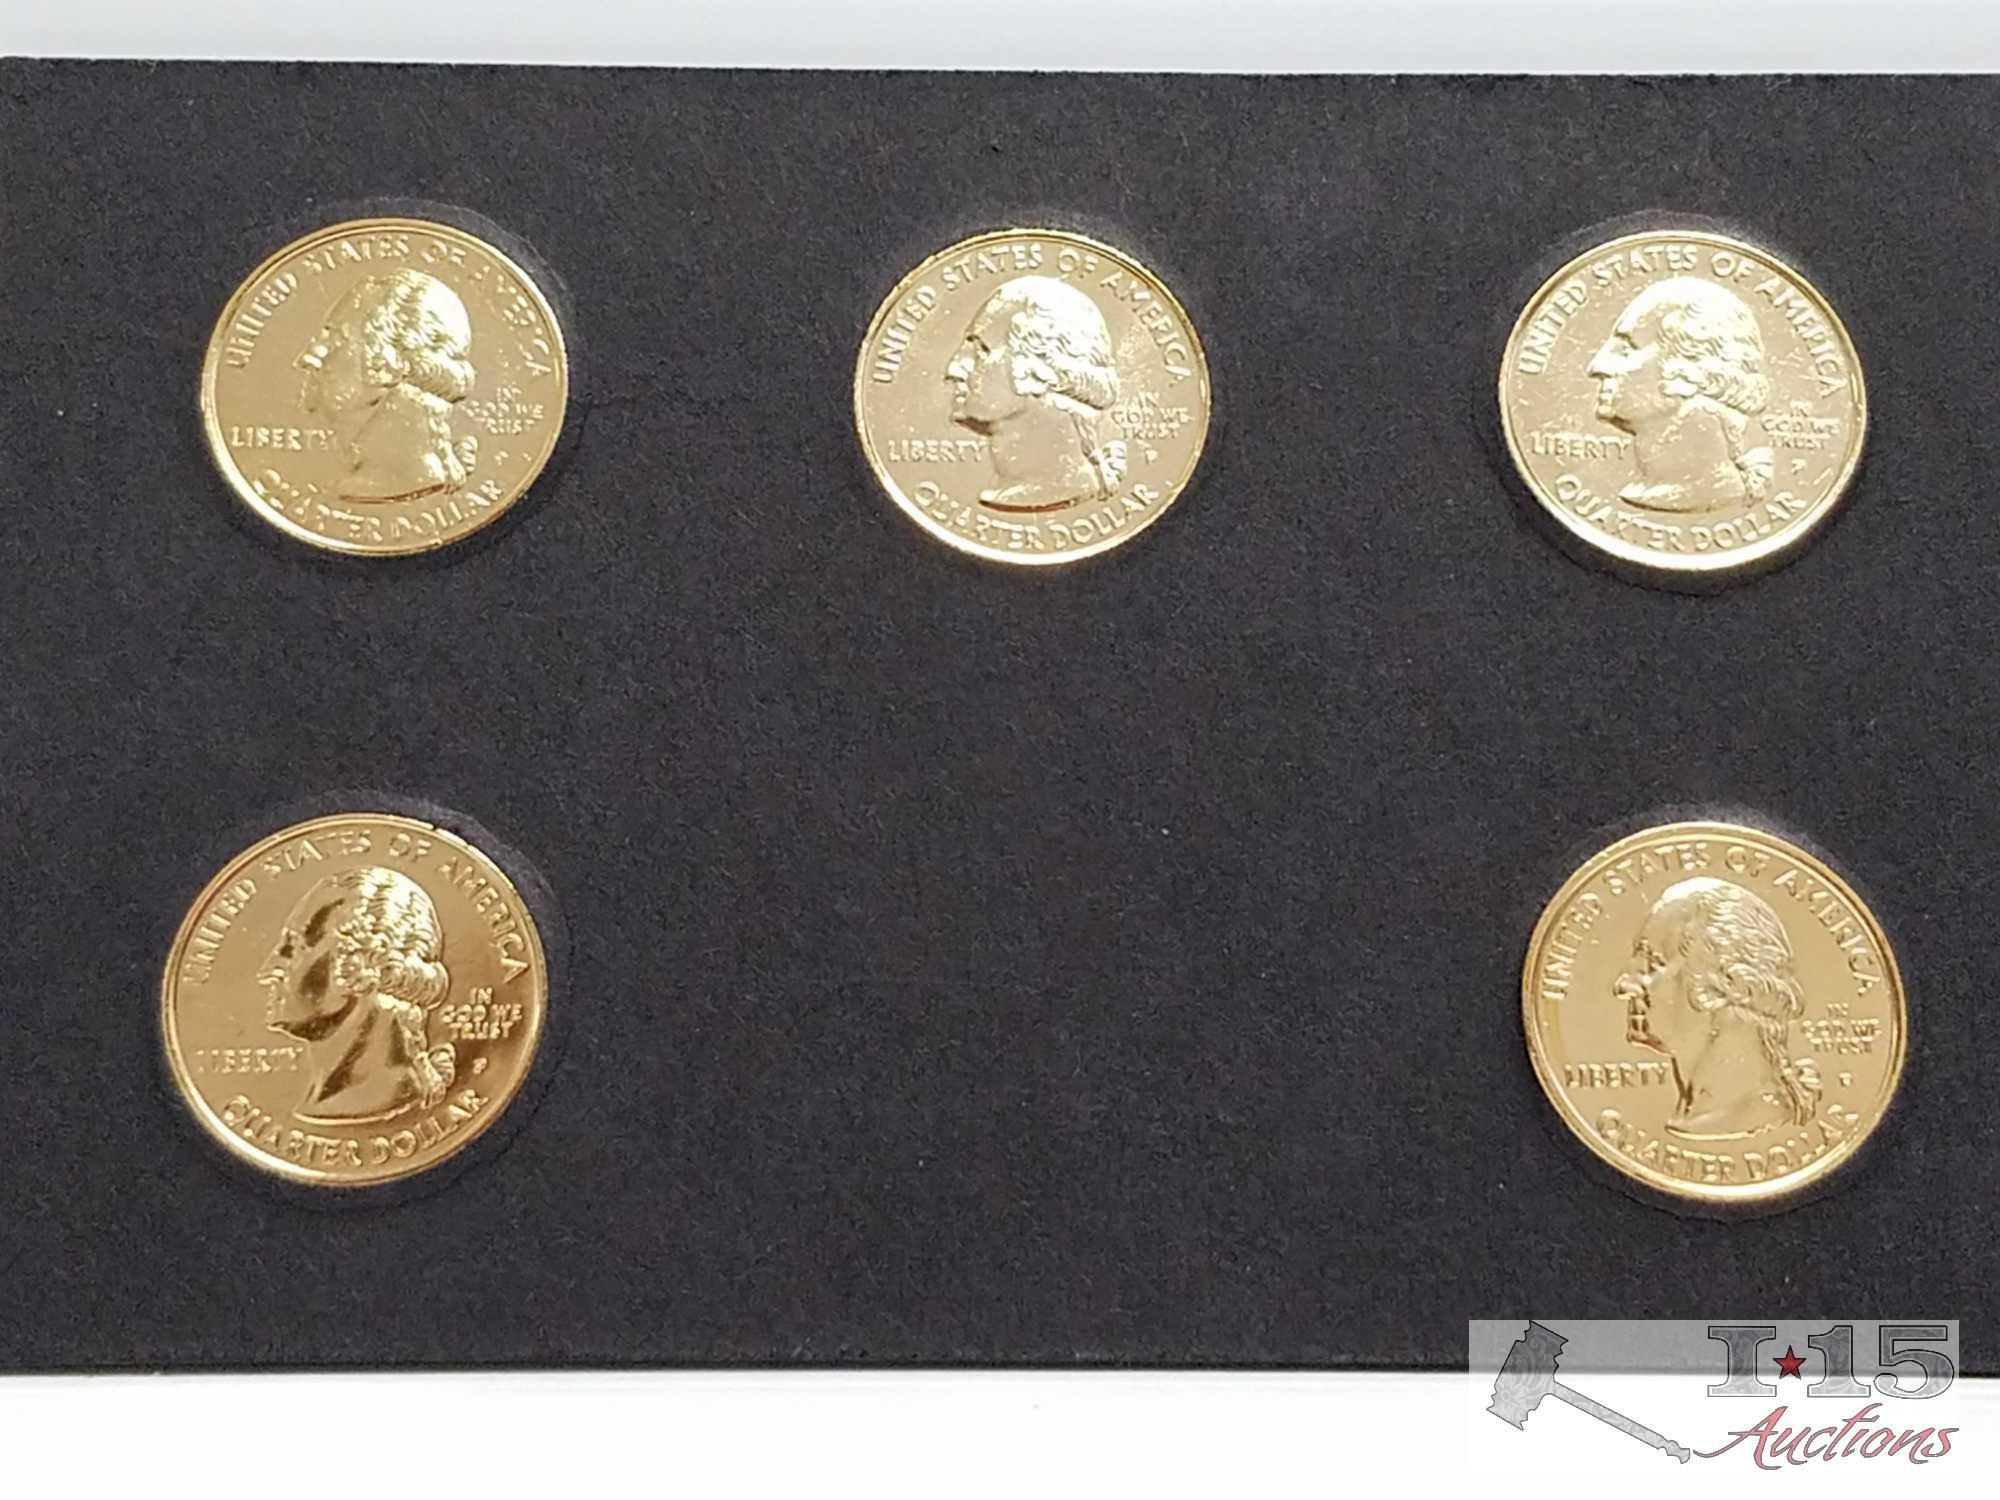 24 - 2000 P Sacagawea Eagle Gold Dollar coins, 15 - Gold Plated State Quarters, 1989 D Quarter, 1990